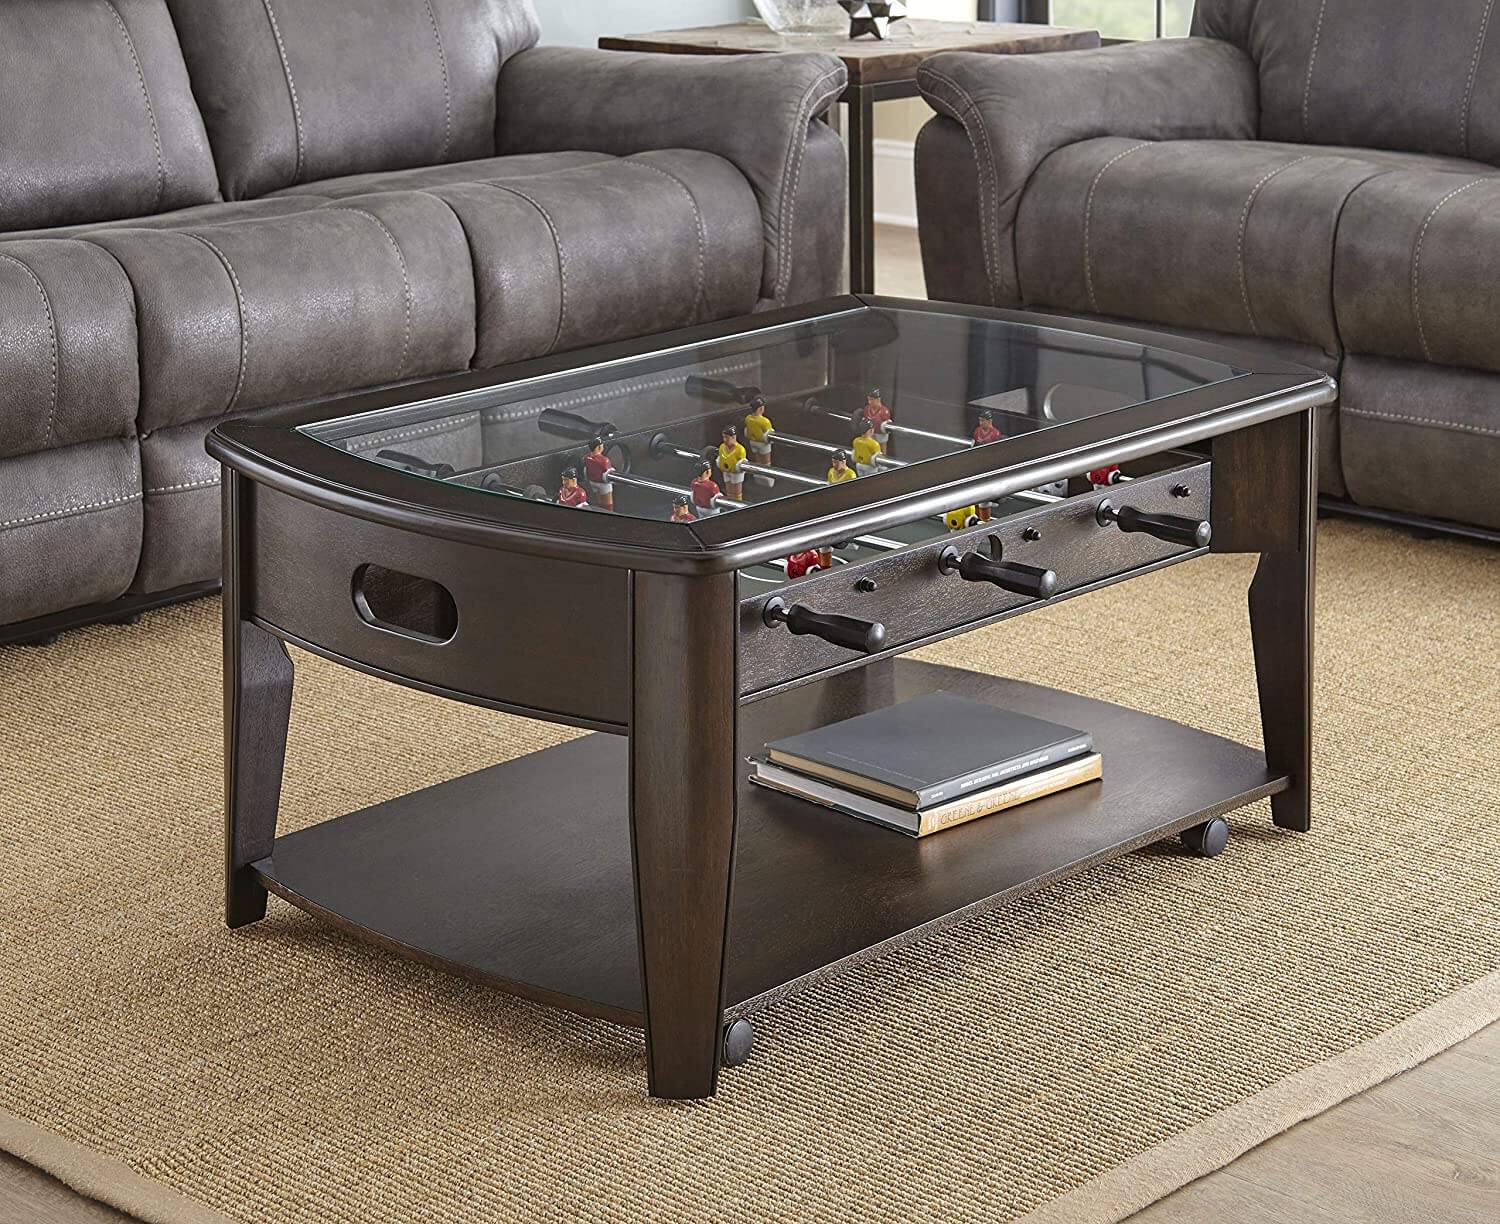 6 Best Foosball Coffee Tables For Your Living Room | SportsShow Review